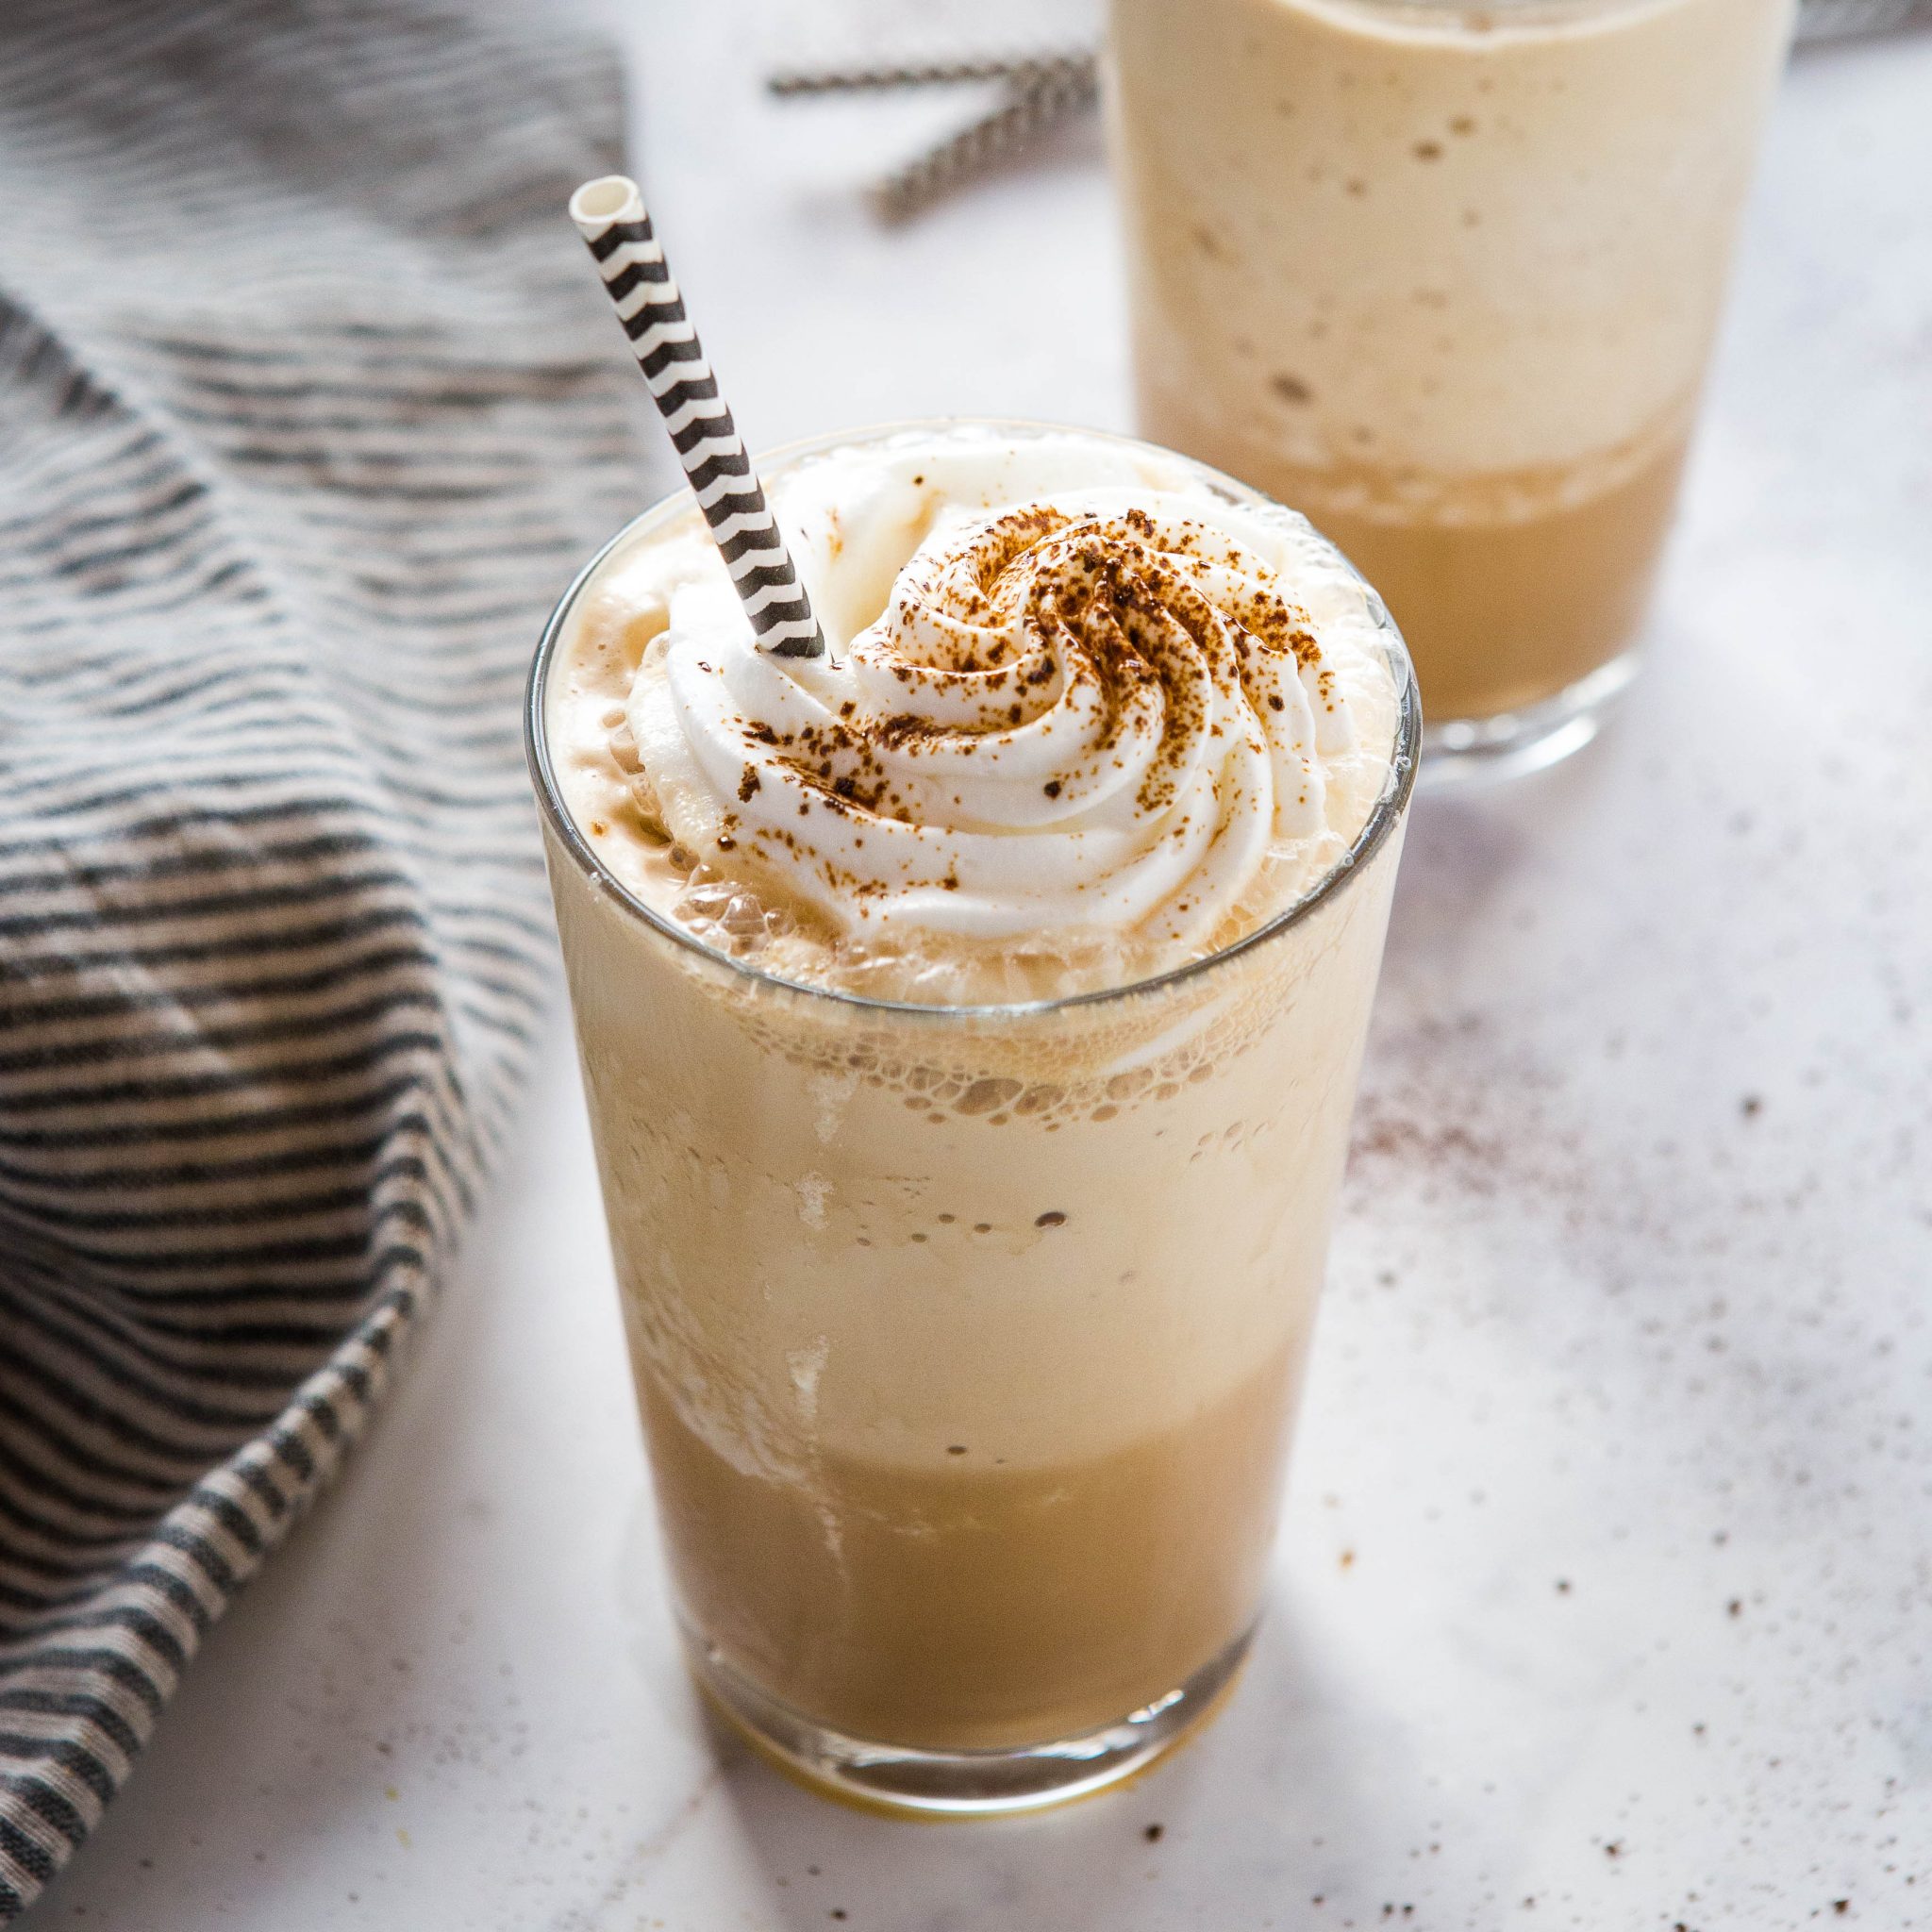 https://thebusybaker.ca/wp-content/uploads/2020/05/easy-healthy-homemade-frappuccino-fb-ig-4-scaled.jpg